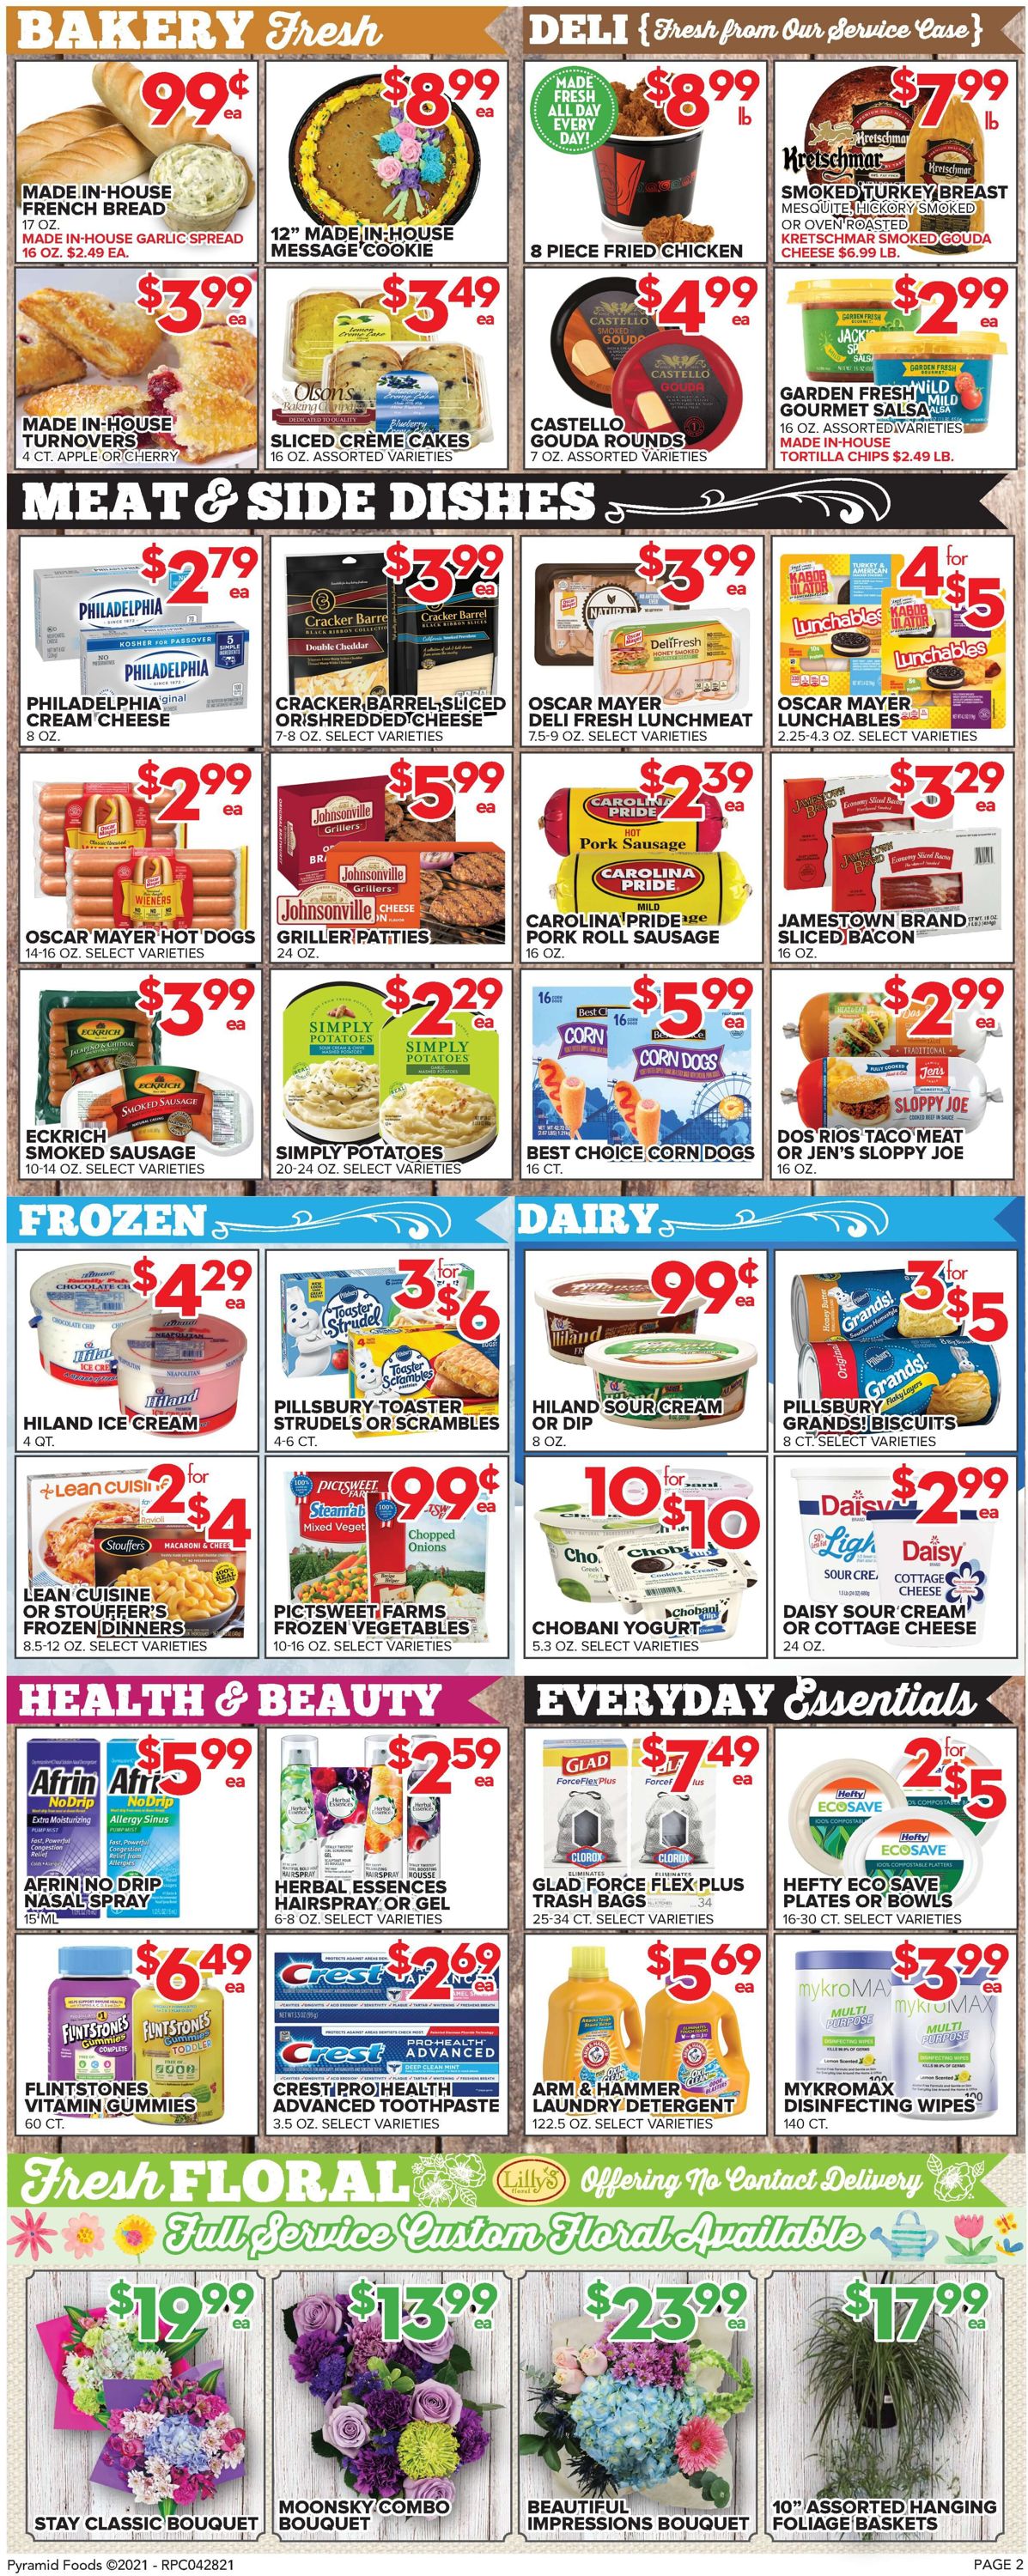 Price Cutter Weekly Ad Circular - valid 04/28-05/04/2021 (Page 2)